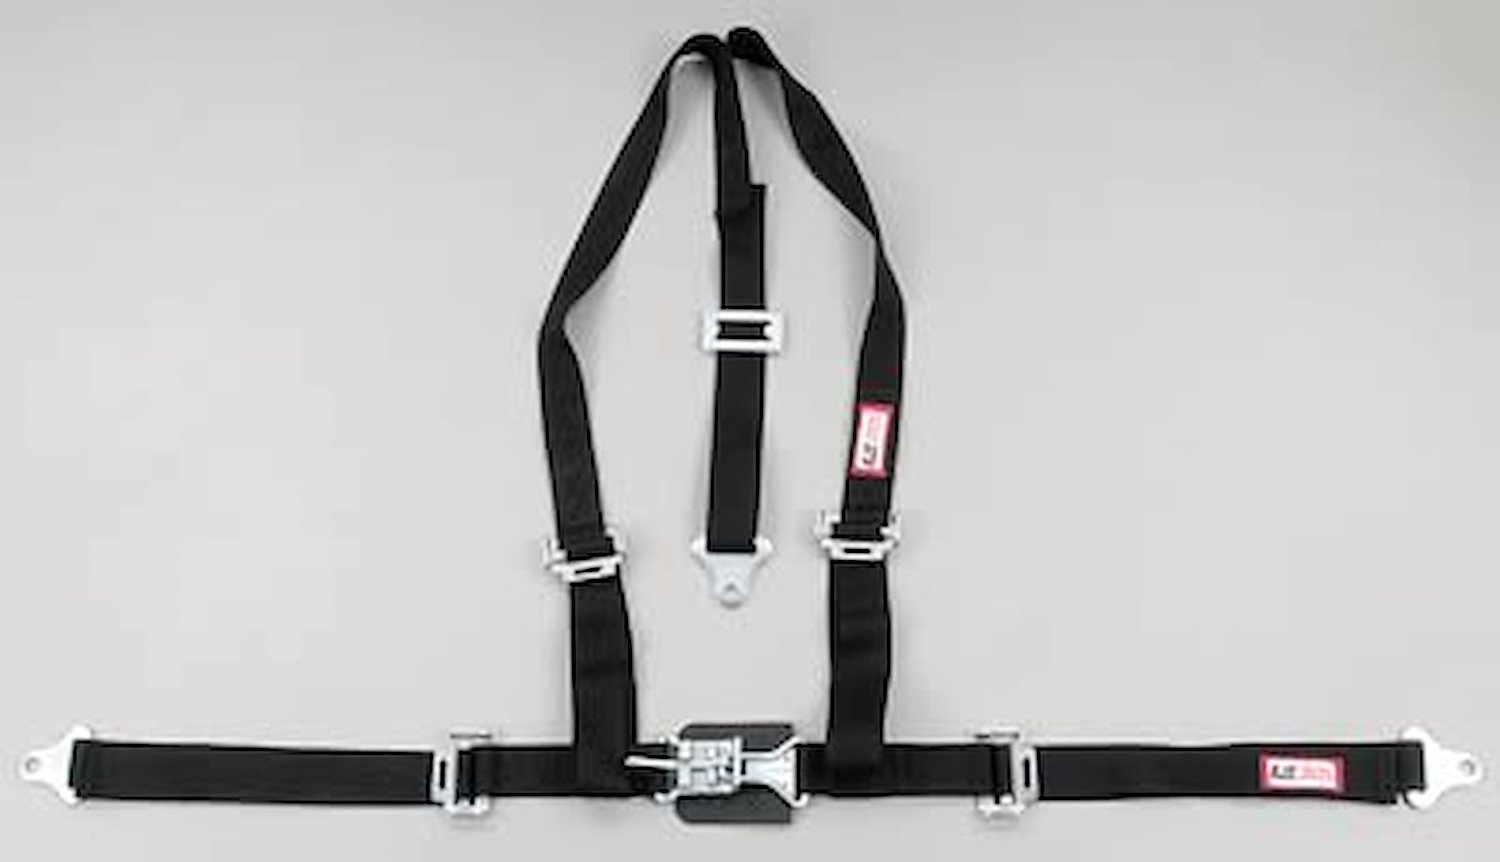 NON-SFI L&L HARNESS 3 PULL UP Lap BELT SNAP SEWN IN 2 S.H. Y FLOOR Mount w/STERNUM STRAP WRAP/SNAP ORANGE